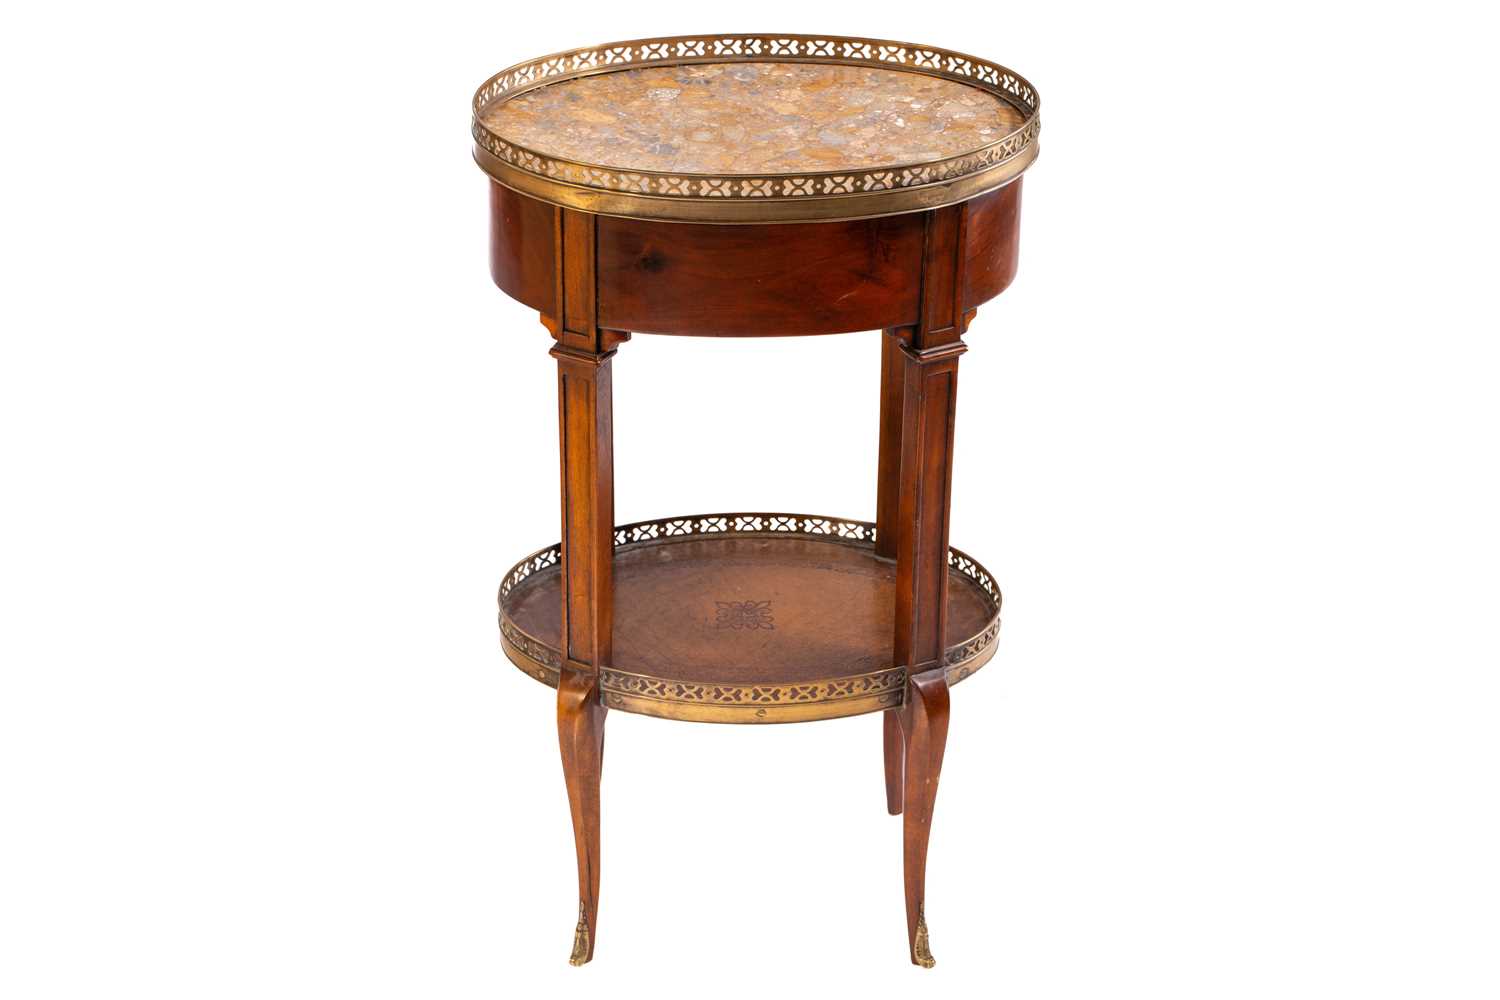 A French Napoleon III style mahogany oval table en chiffonier with marble top, 20th century, with - Image 4 of 10